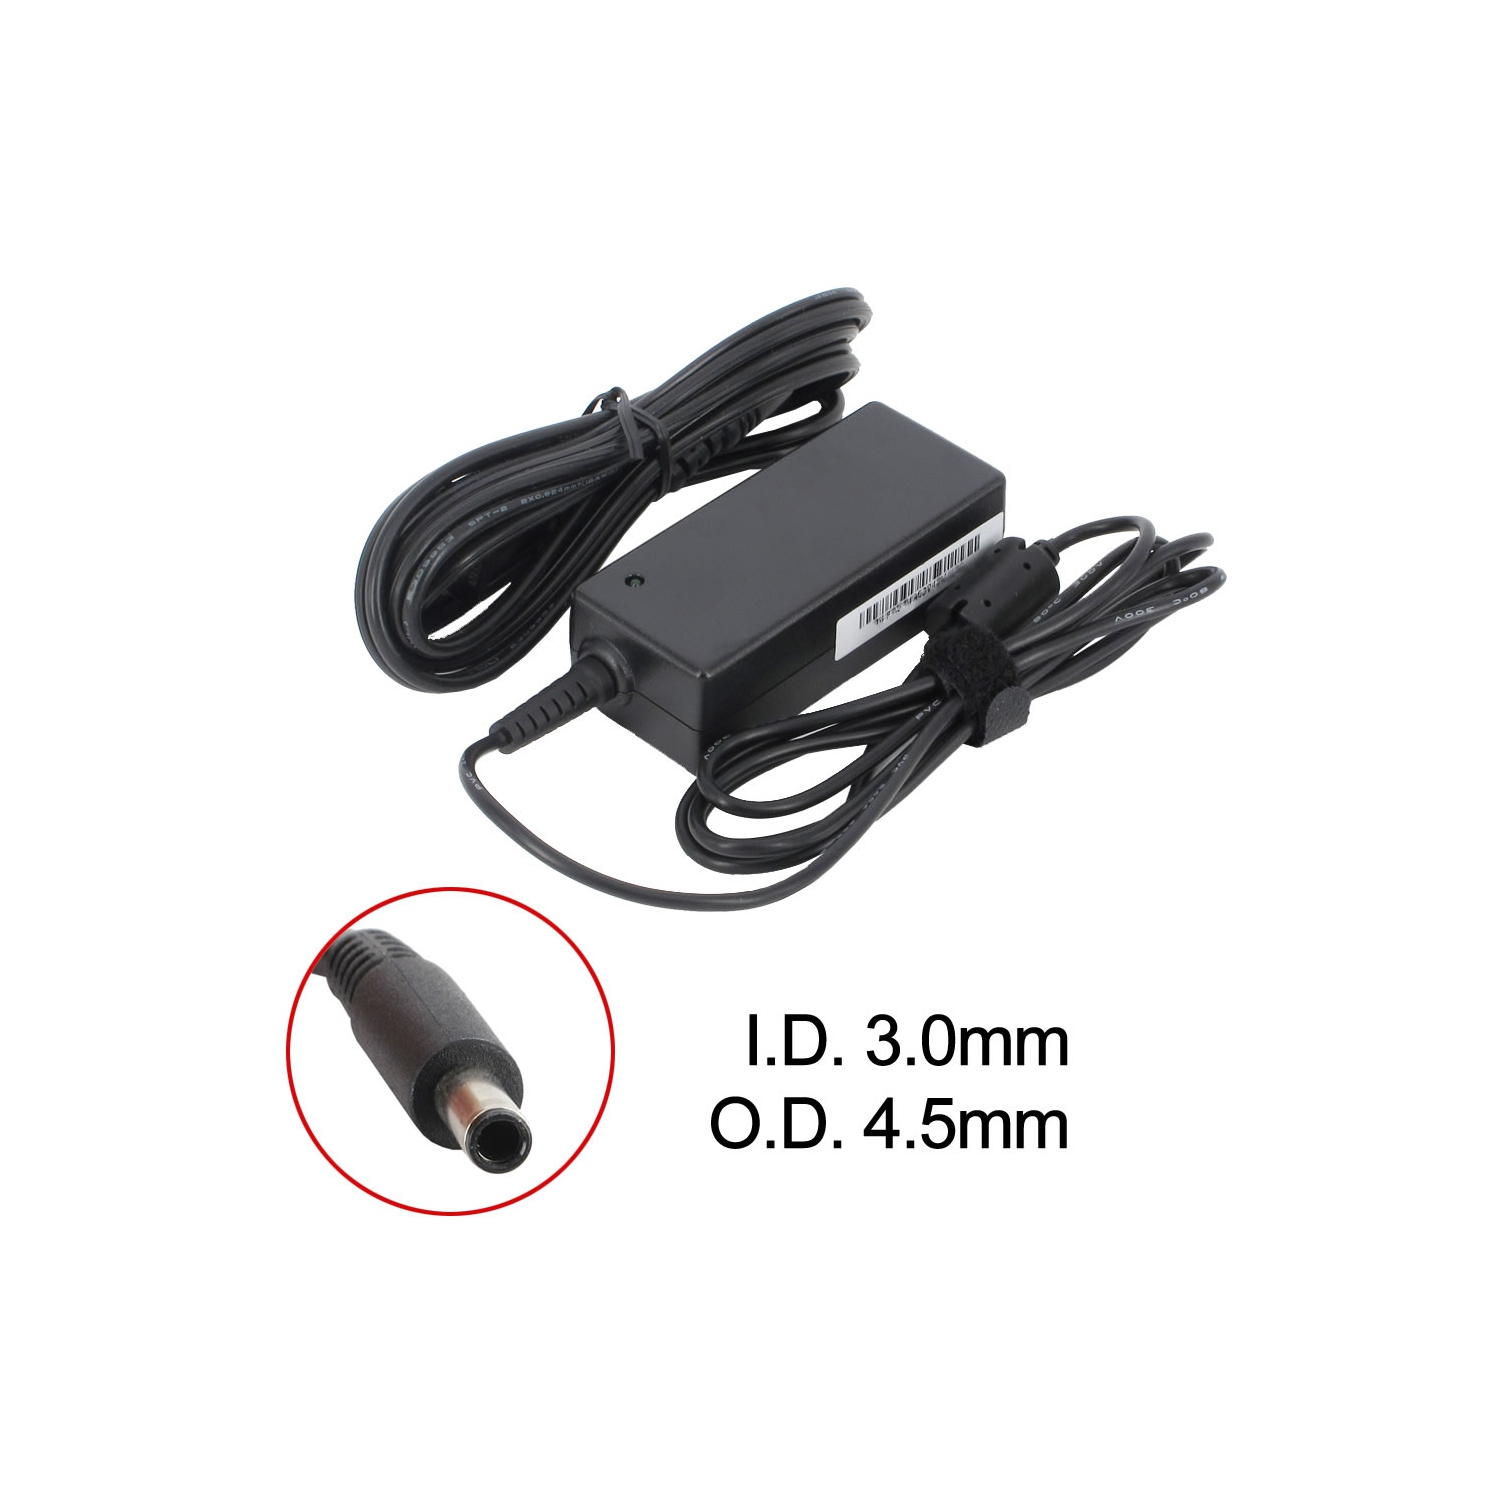 BattDepot: New Replacement Laptop AC Adapter for Dell XPS 12 MLK, 332-1827, D0KFY, FA45NE1-00, LA45NM140, RFRWK